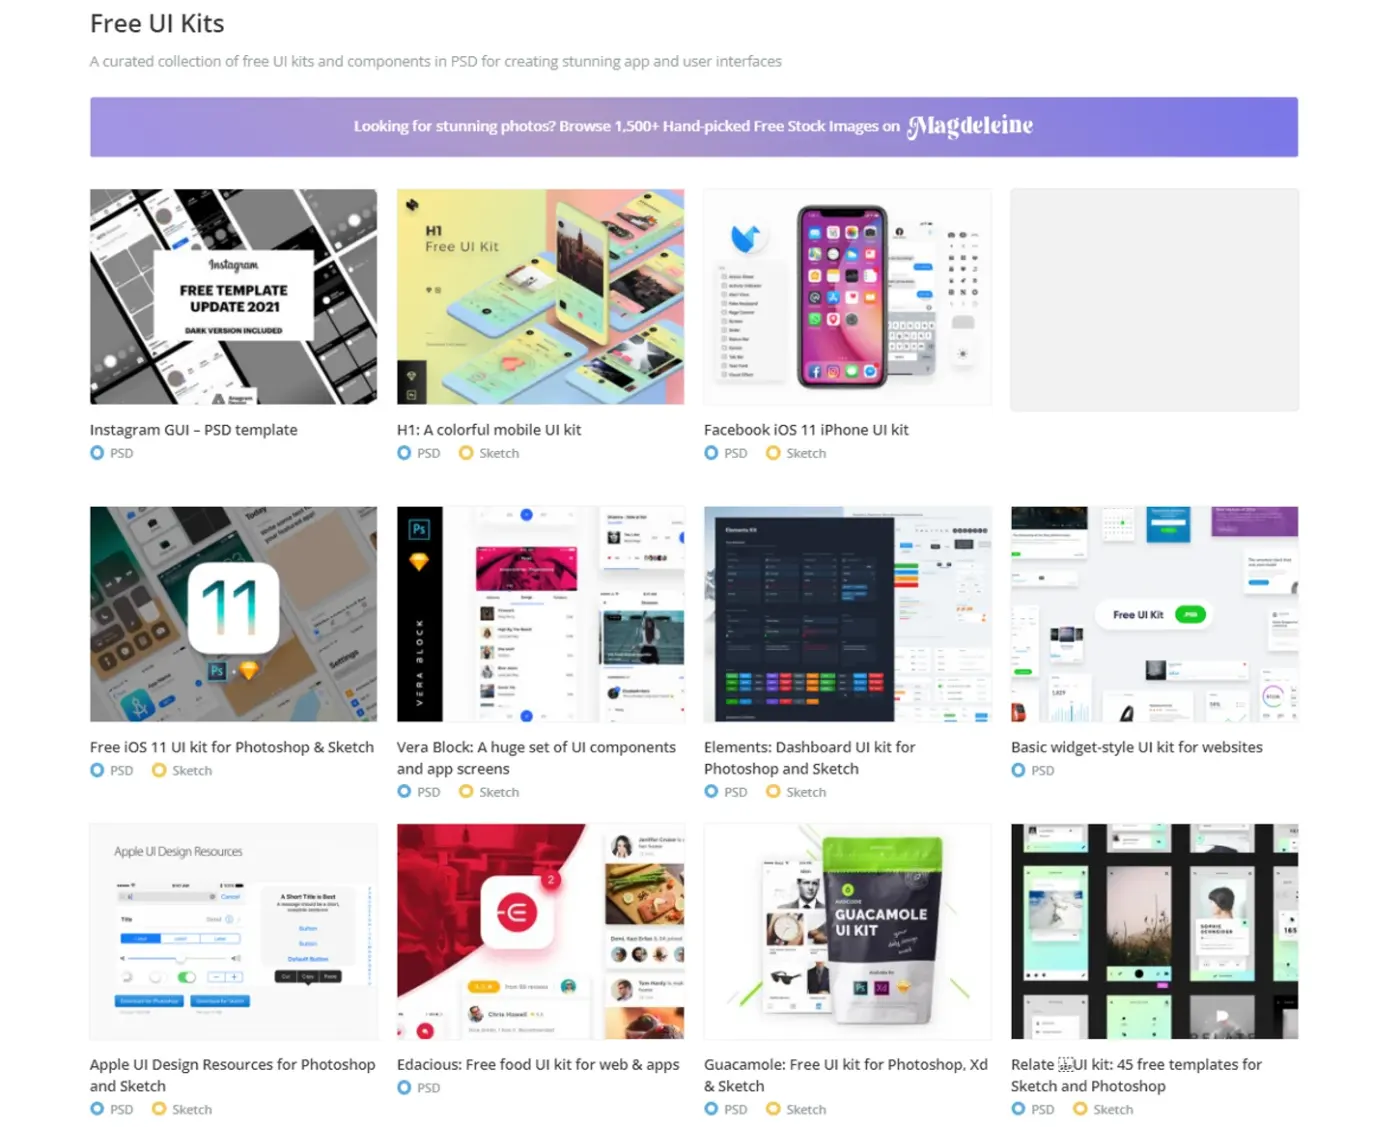 Adobe XD Elements  Free UI Kits, Templates, and more Adobe XD Resources